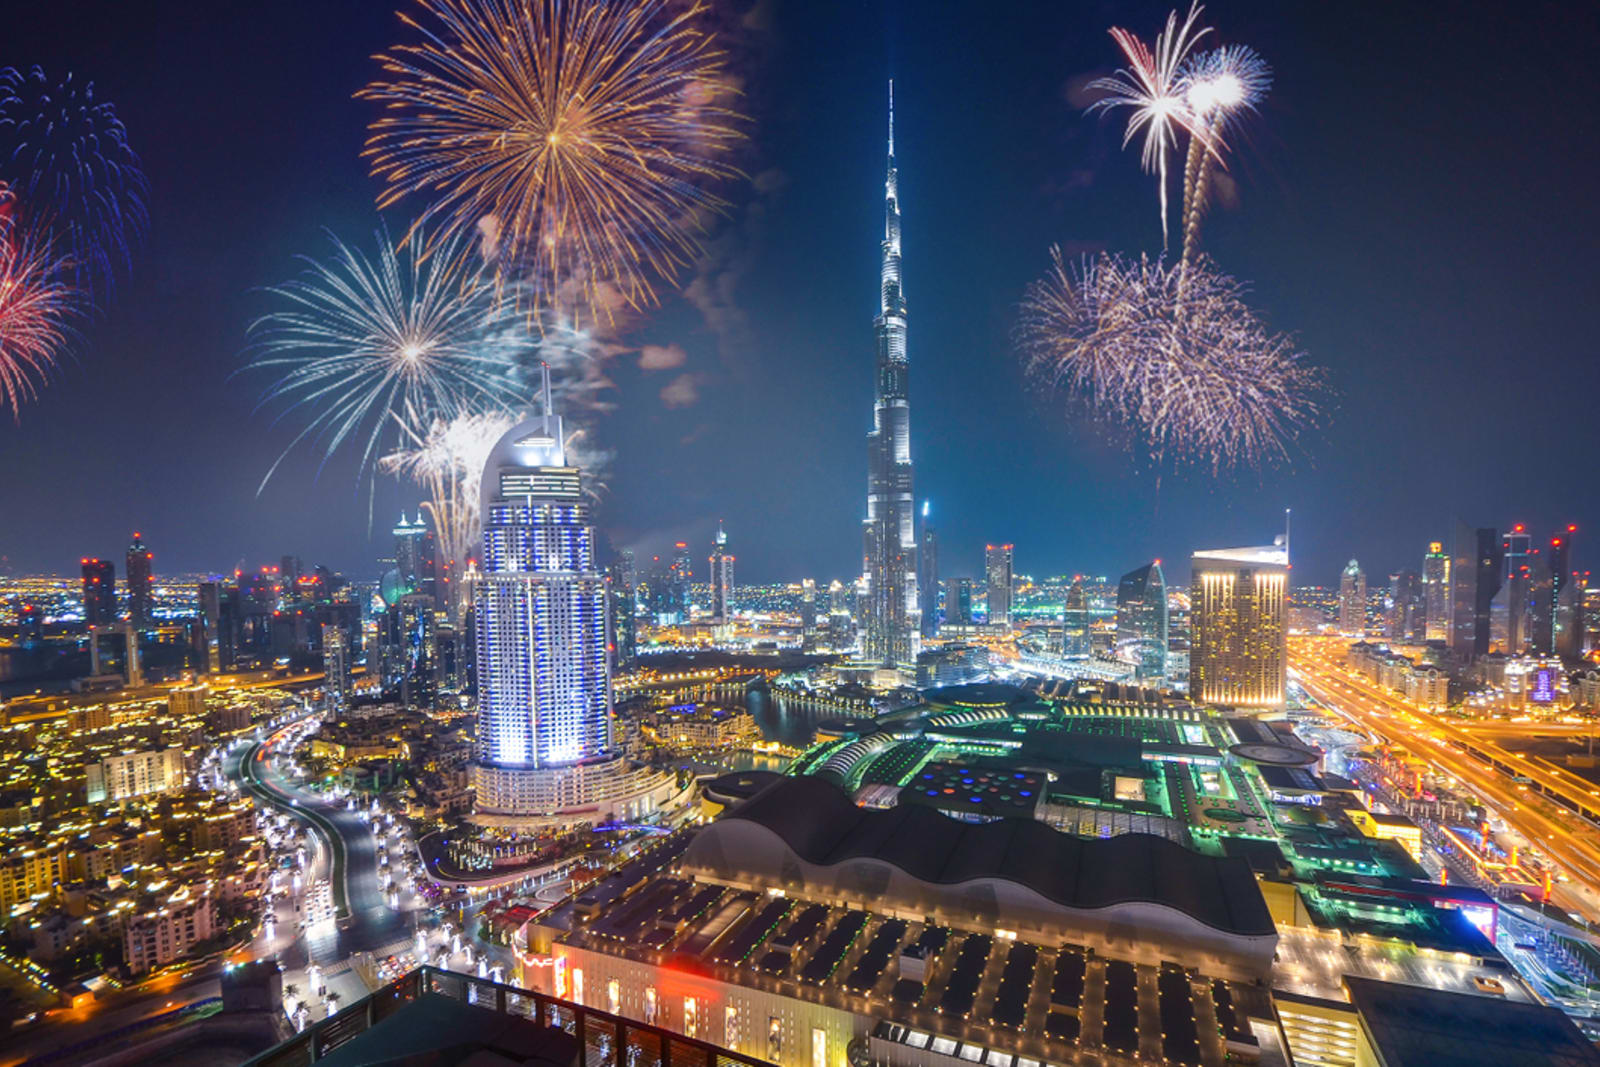 A fireworks display over the city of Dubai